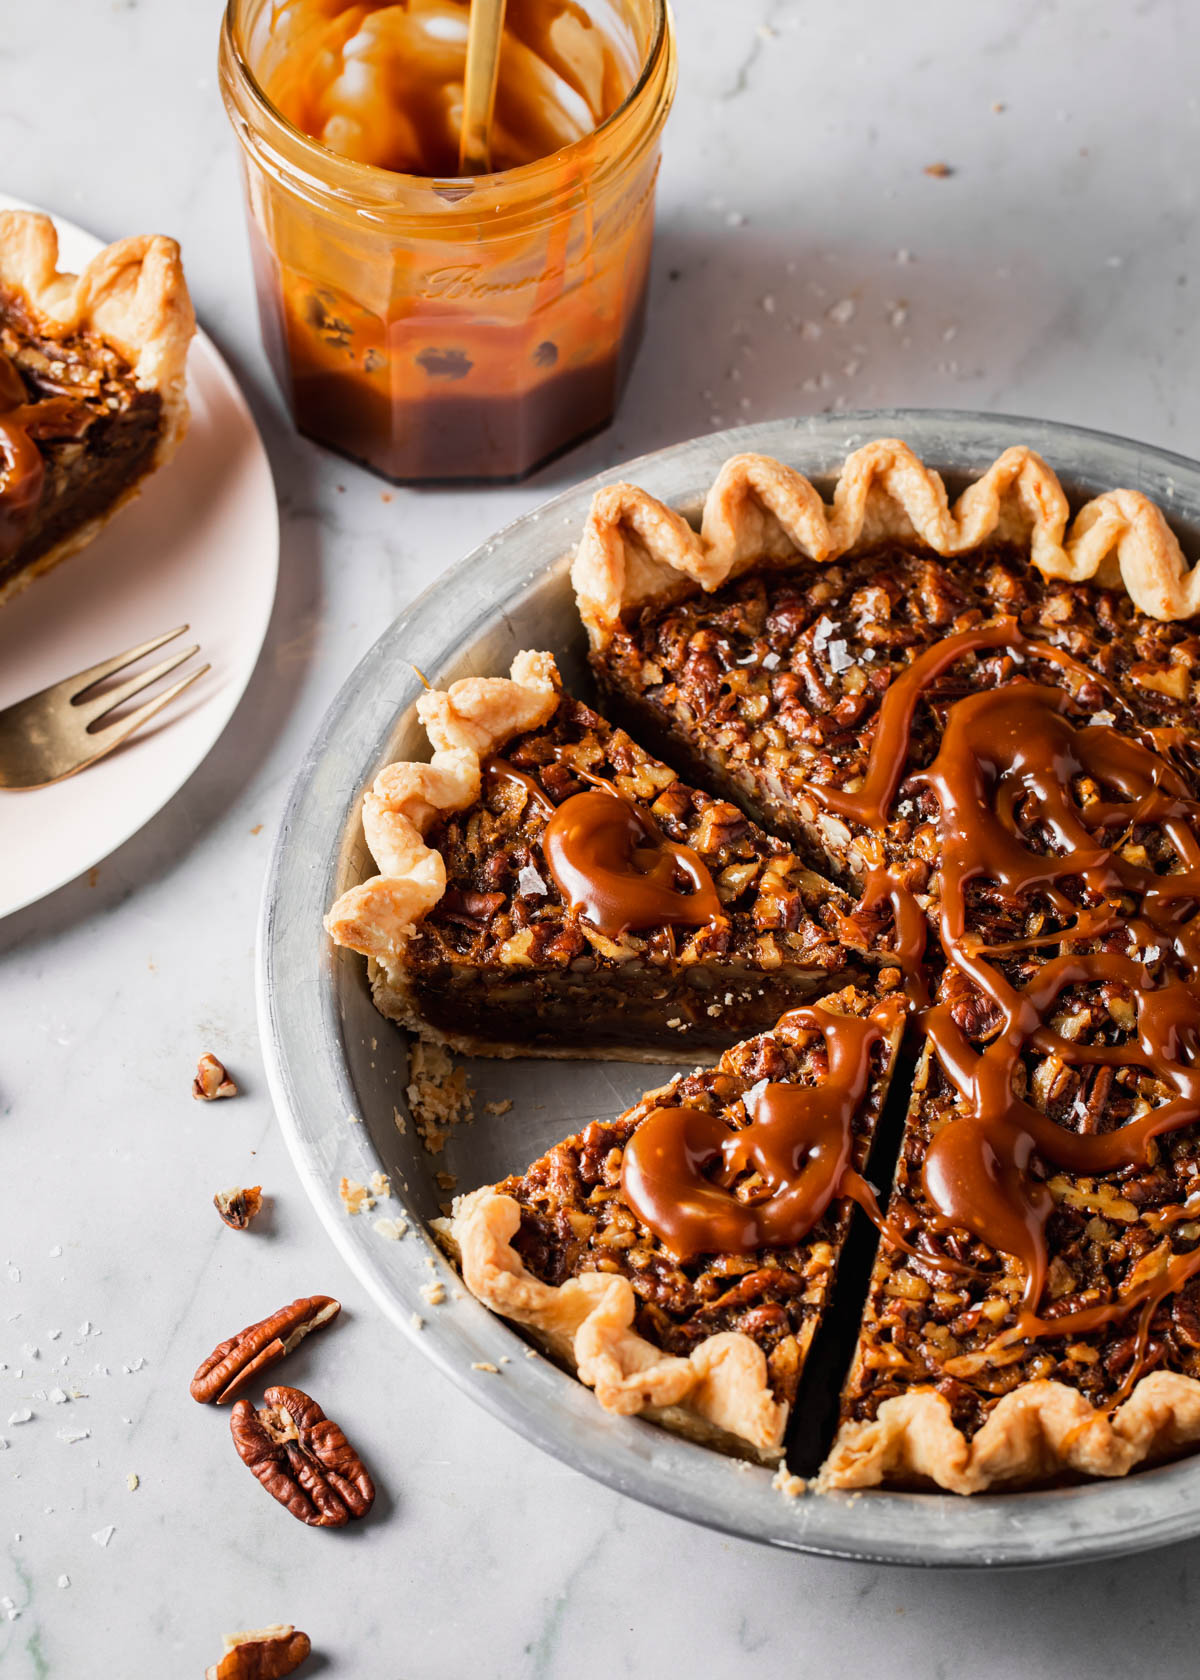 A baked pecan pie with caramel sauce on top